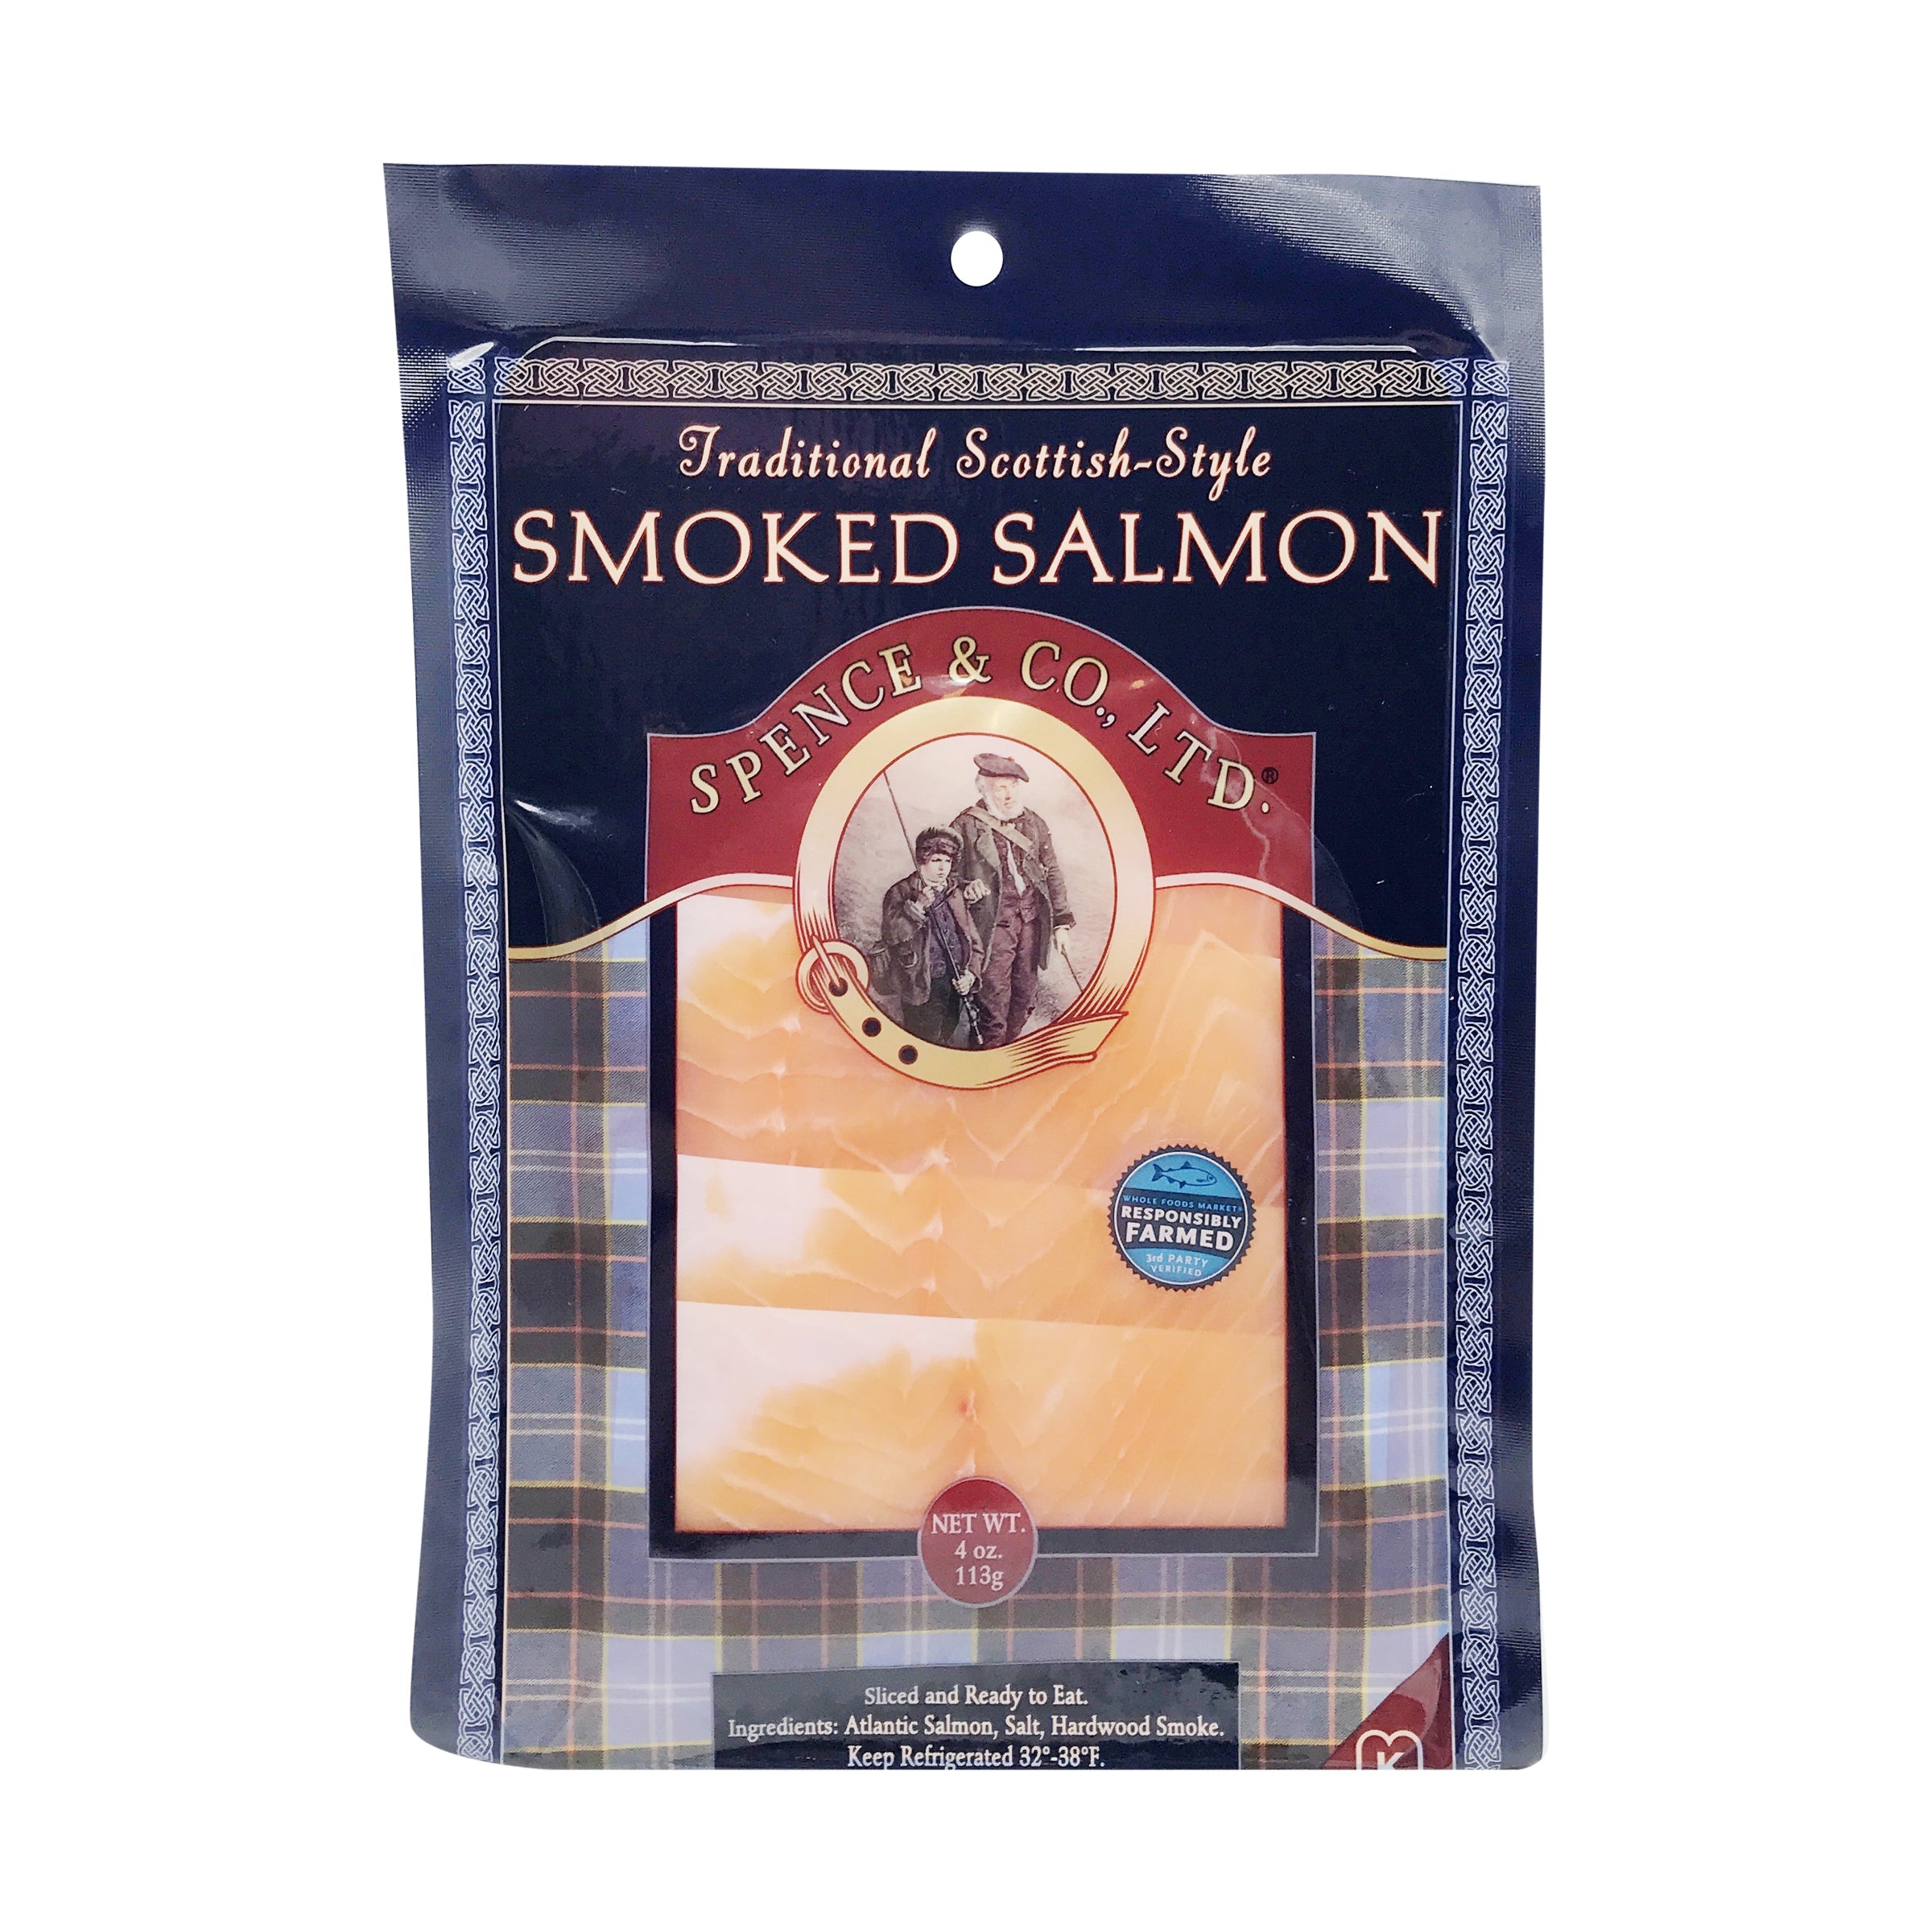 Spence & Co Traditional Scottish Style Smoked Salmon 4oz 6ct